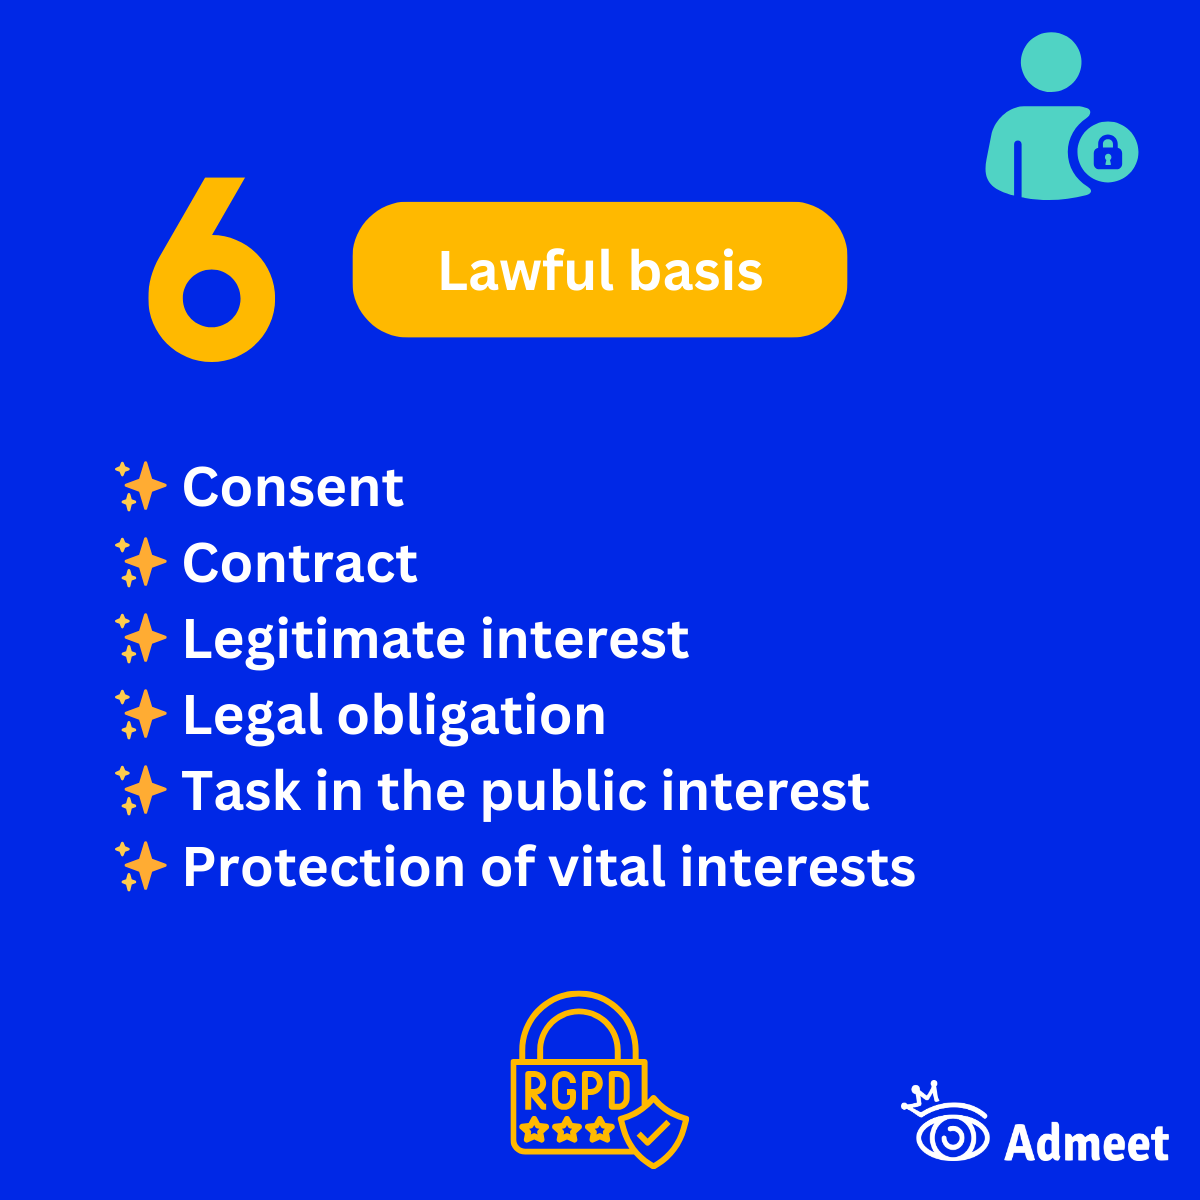 6 legal bases of the GDPR : Consent, Contract, Legitimate interest, Legal obligation, Task in the public interest, Protection of vital interests